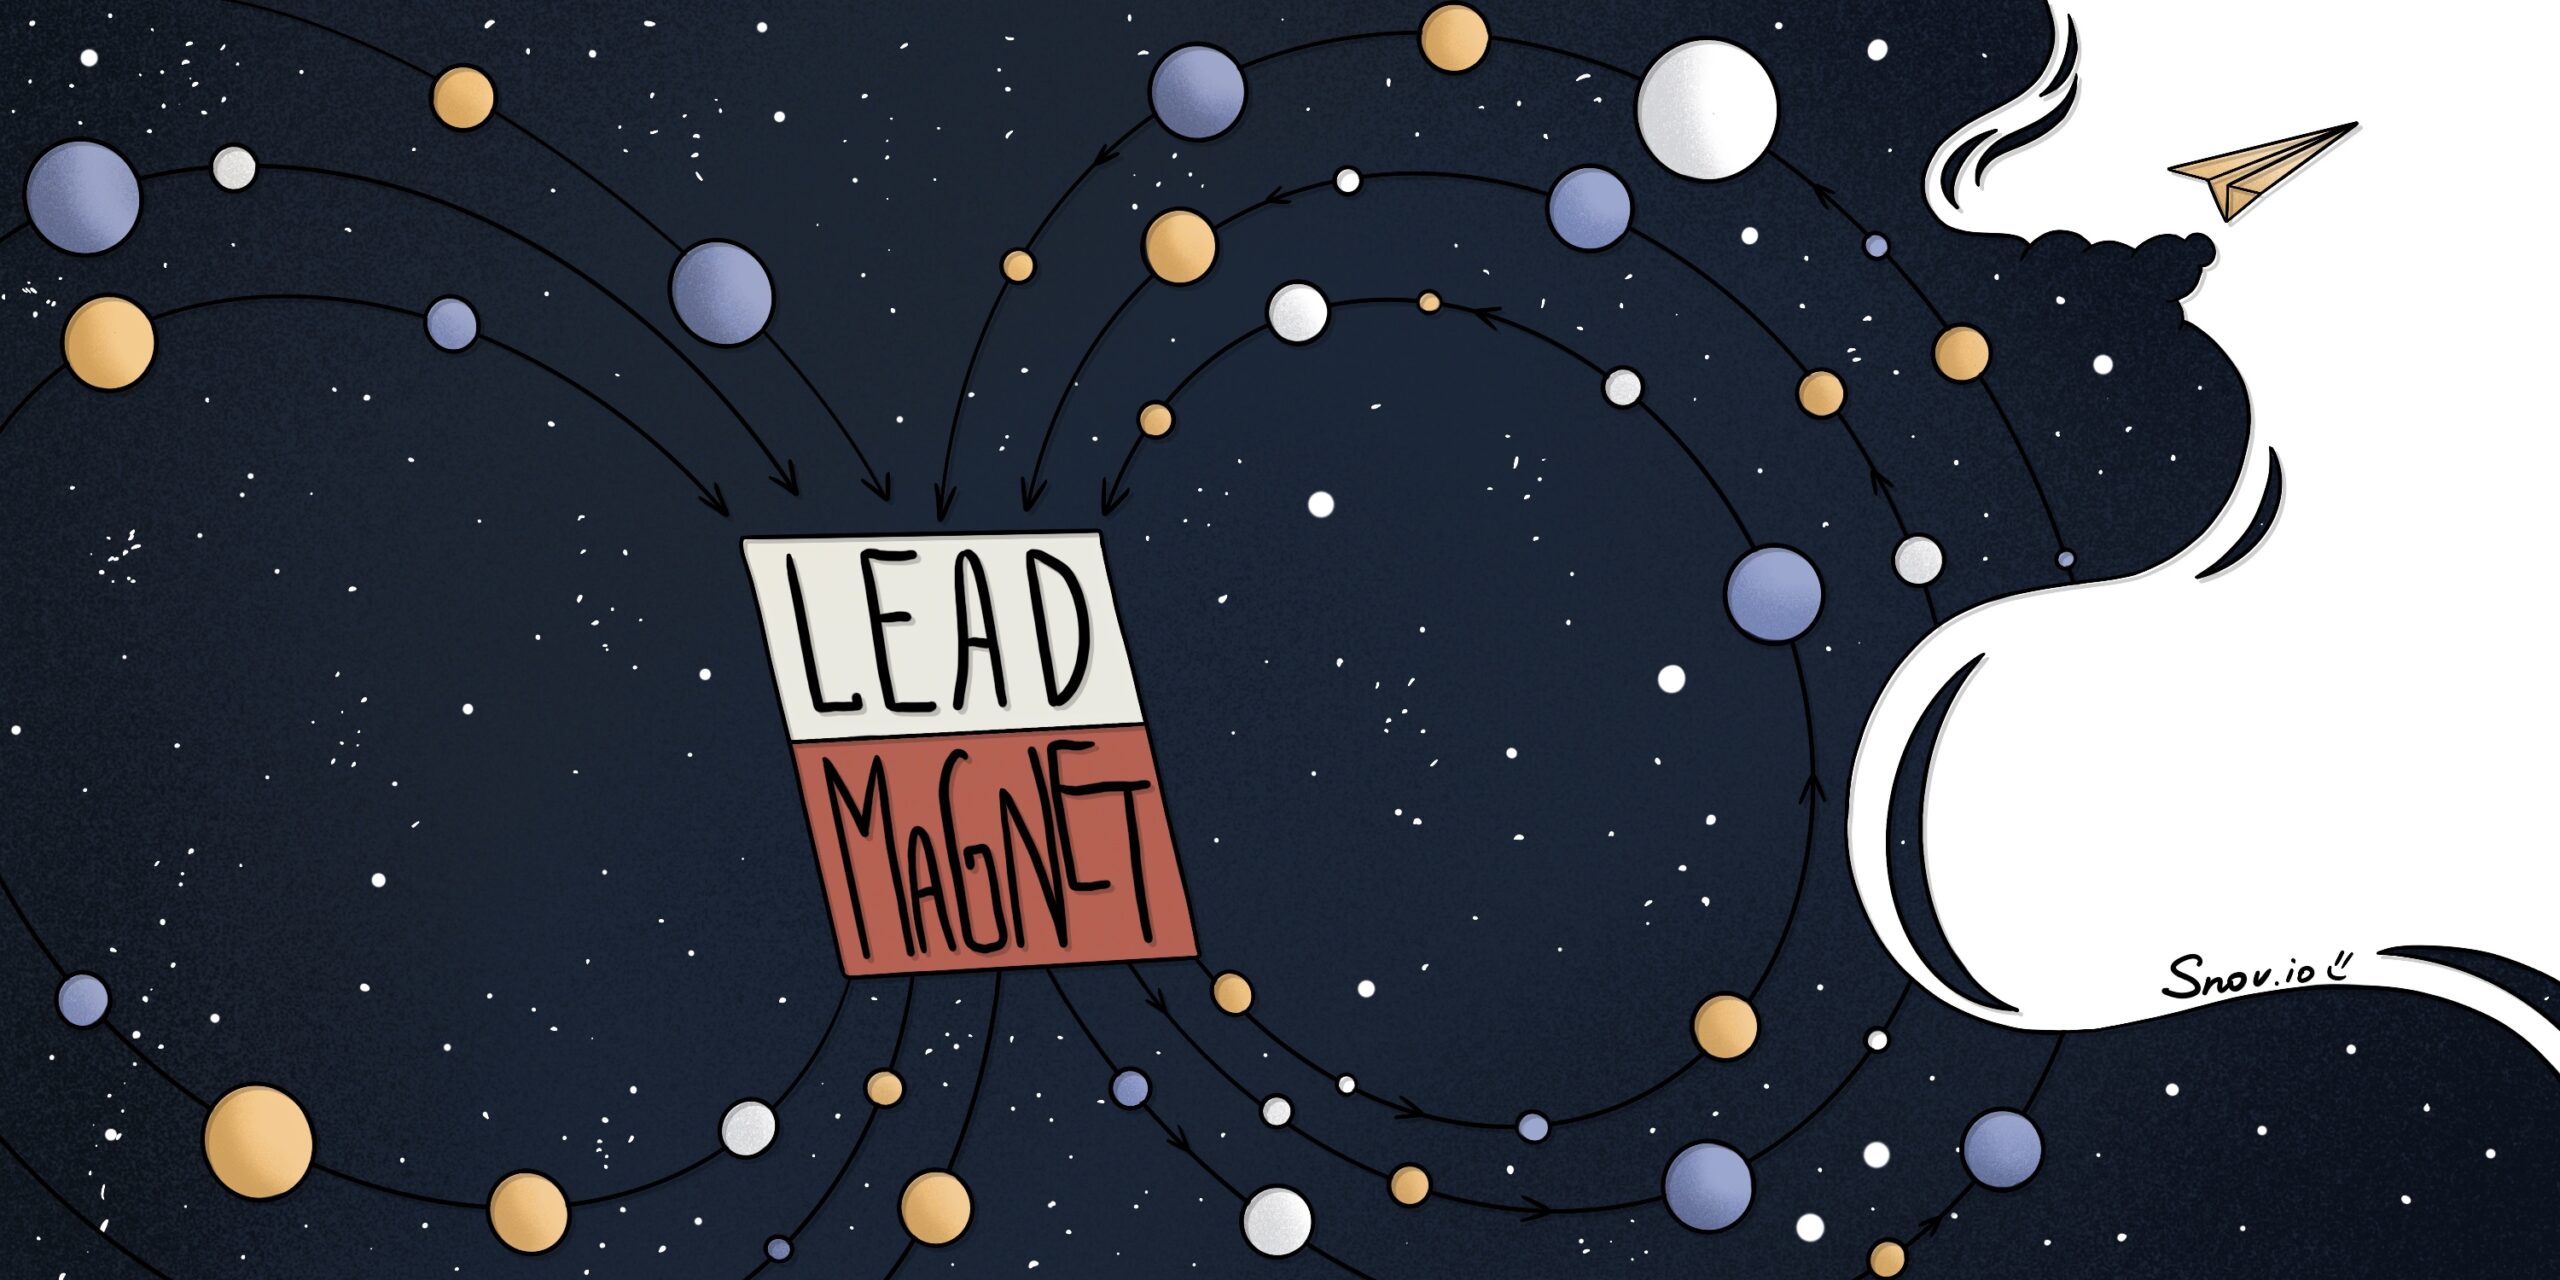 20 Best Lead Magnet Ideas To Expand Your Prospect List